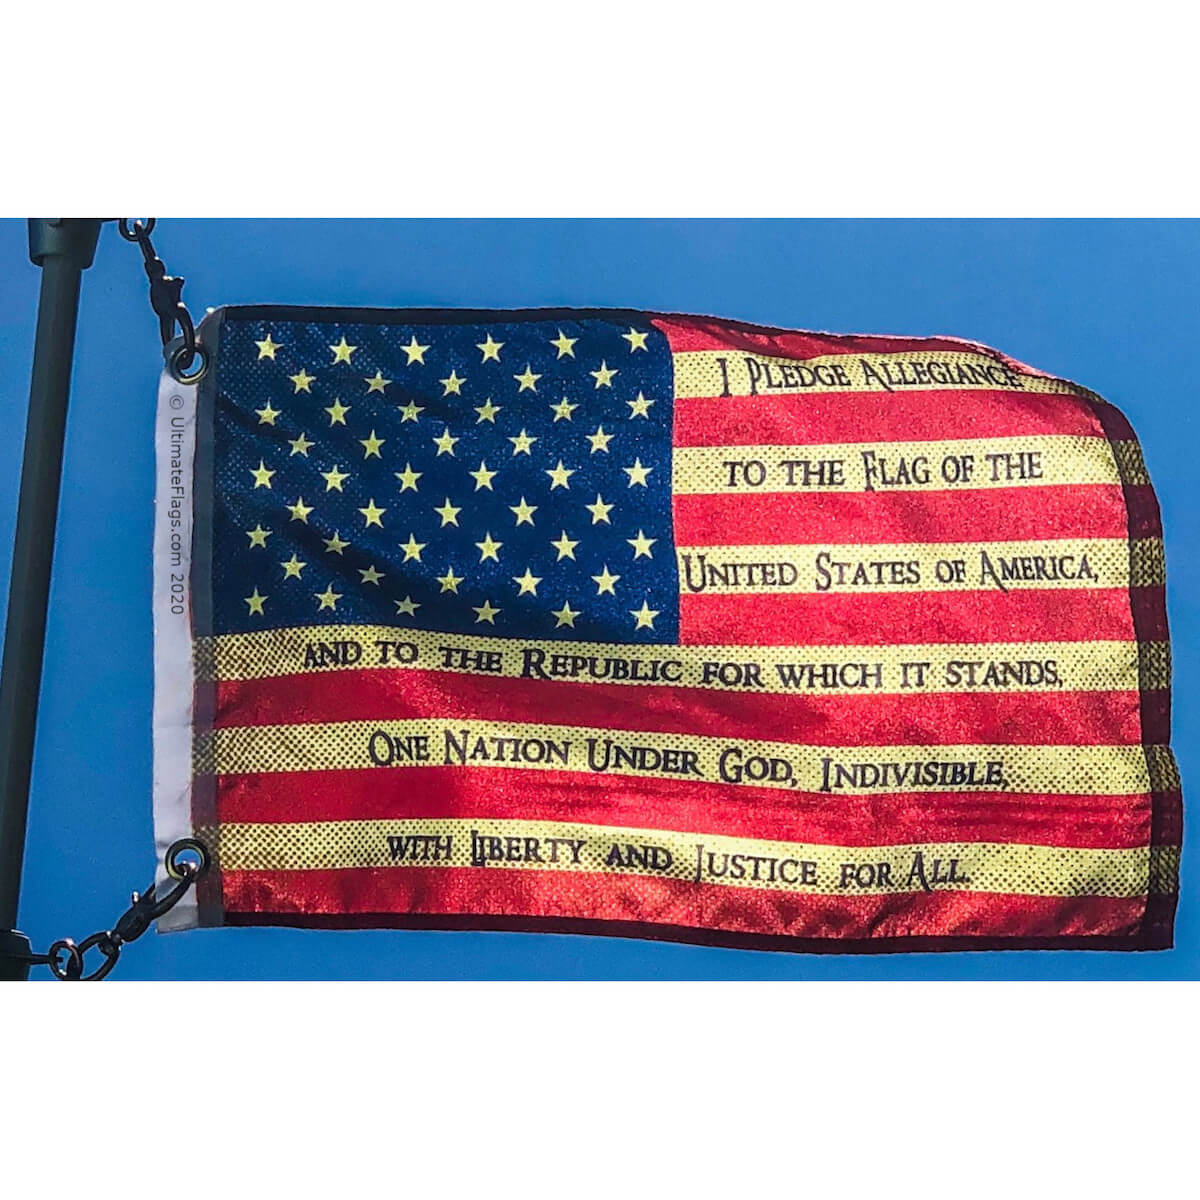 Reflecting America's Legacy: Ultimate Flags Inc